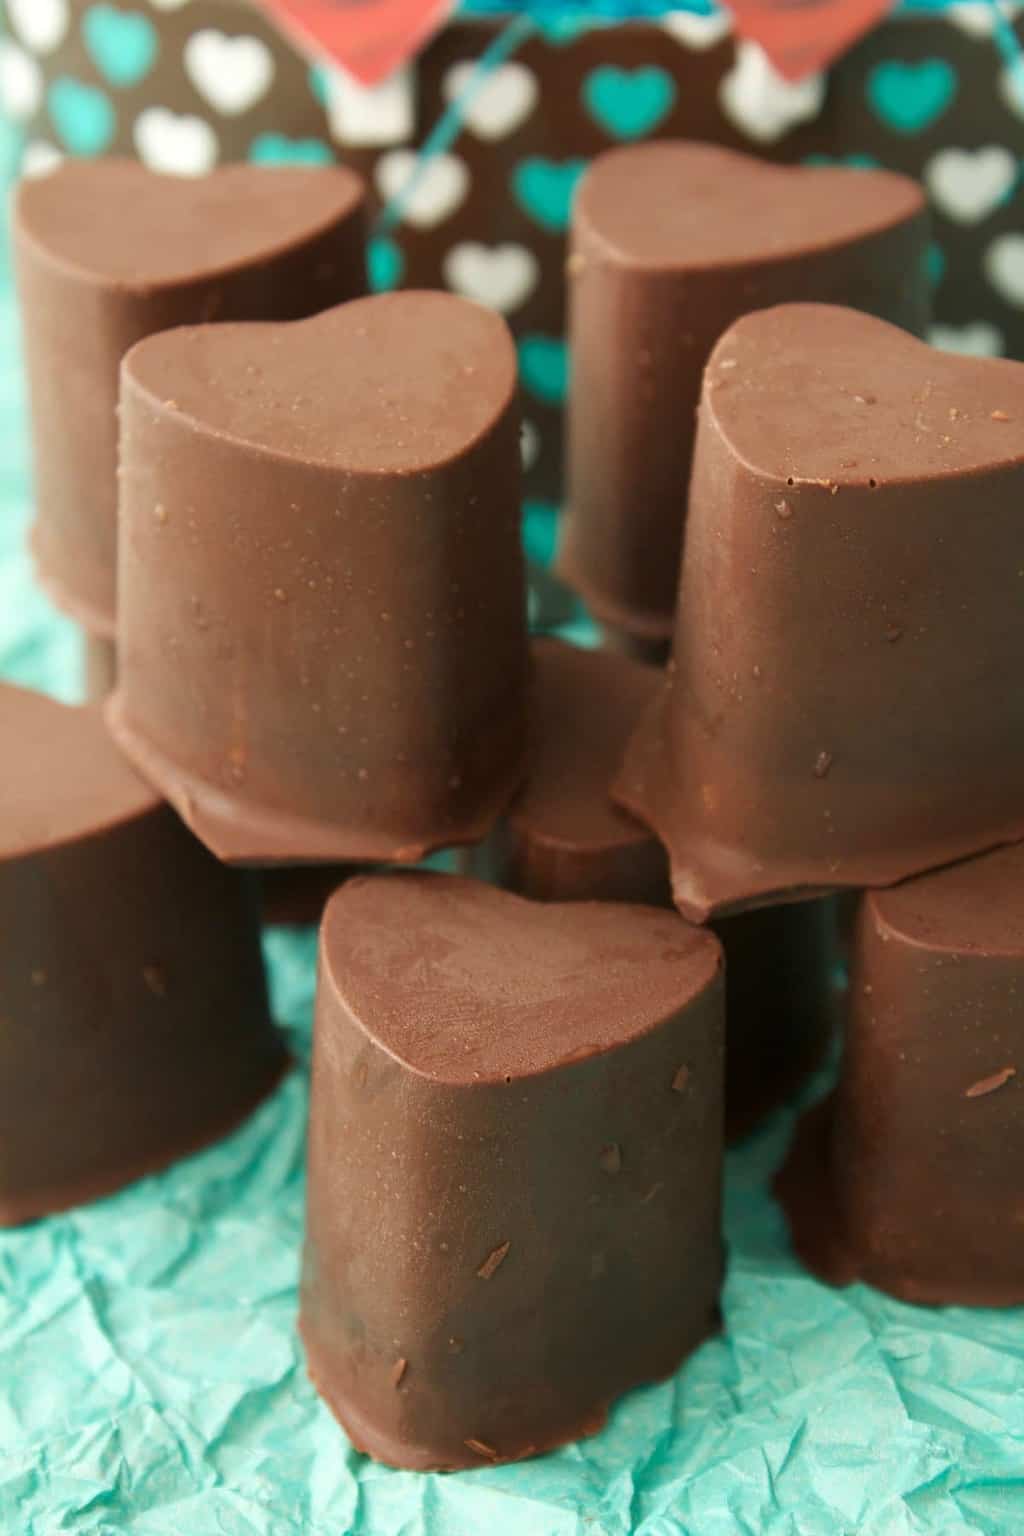 Heart-shaped vegan chocolate caramels in a stack.